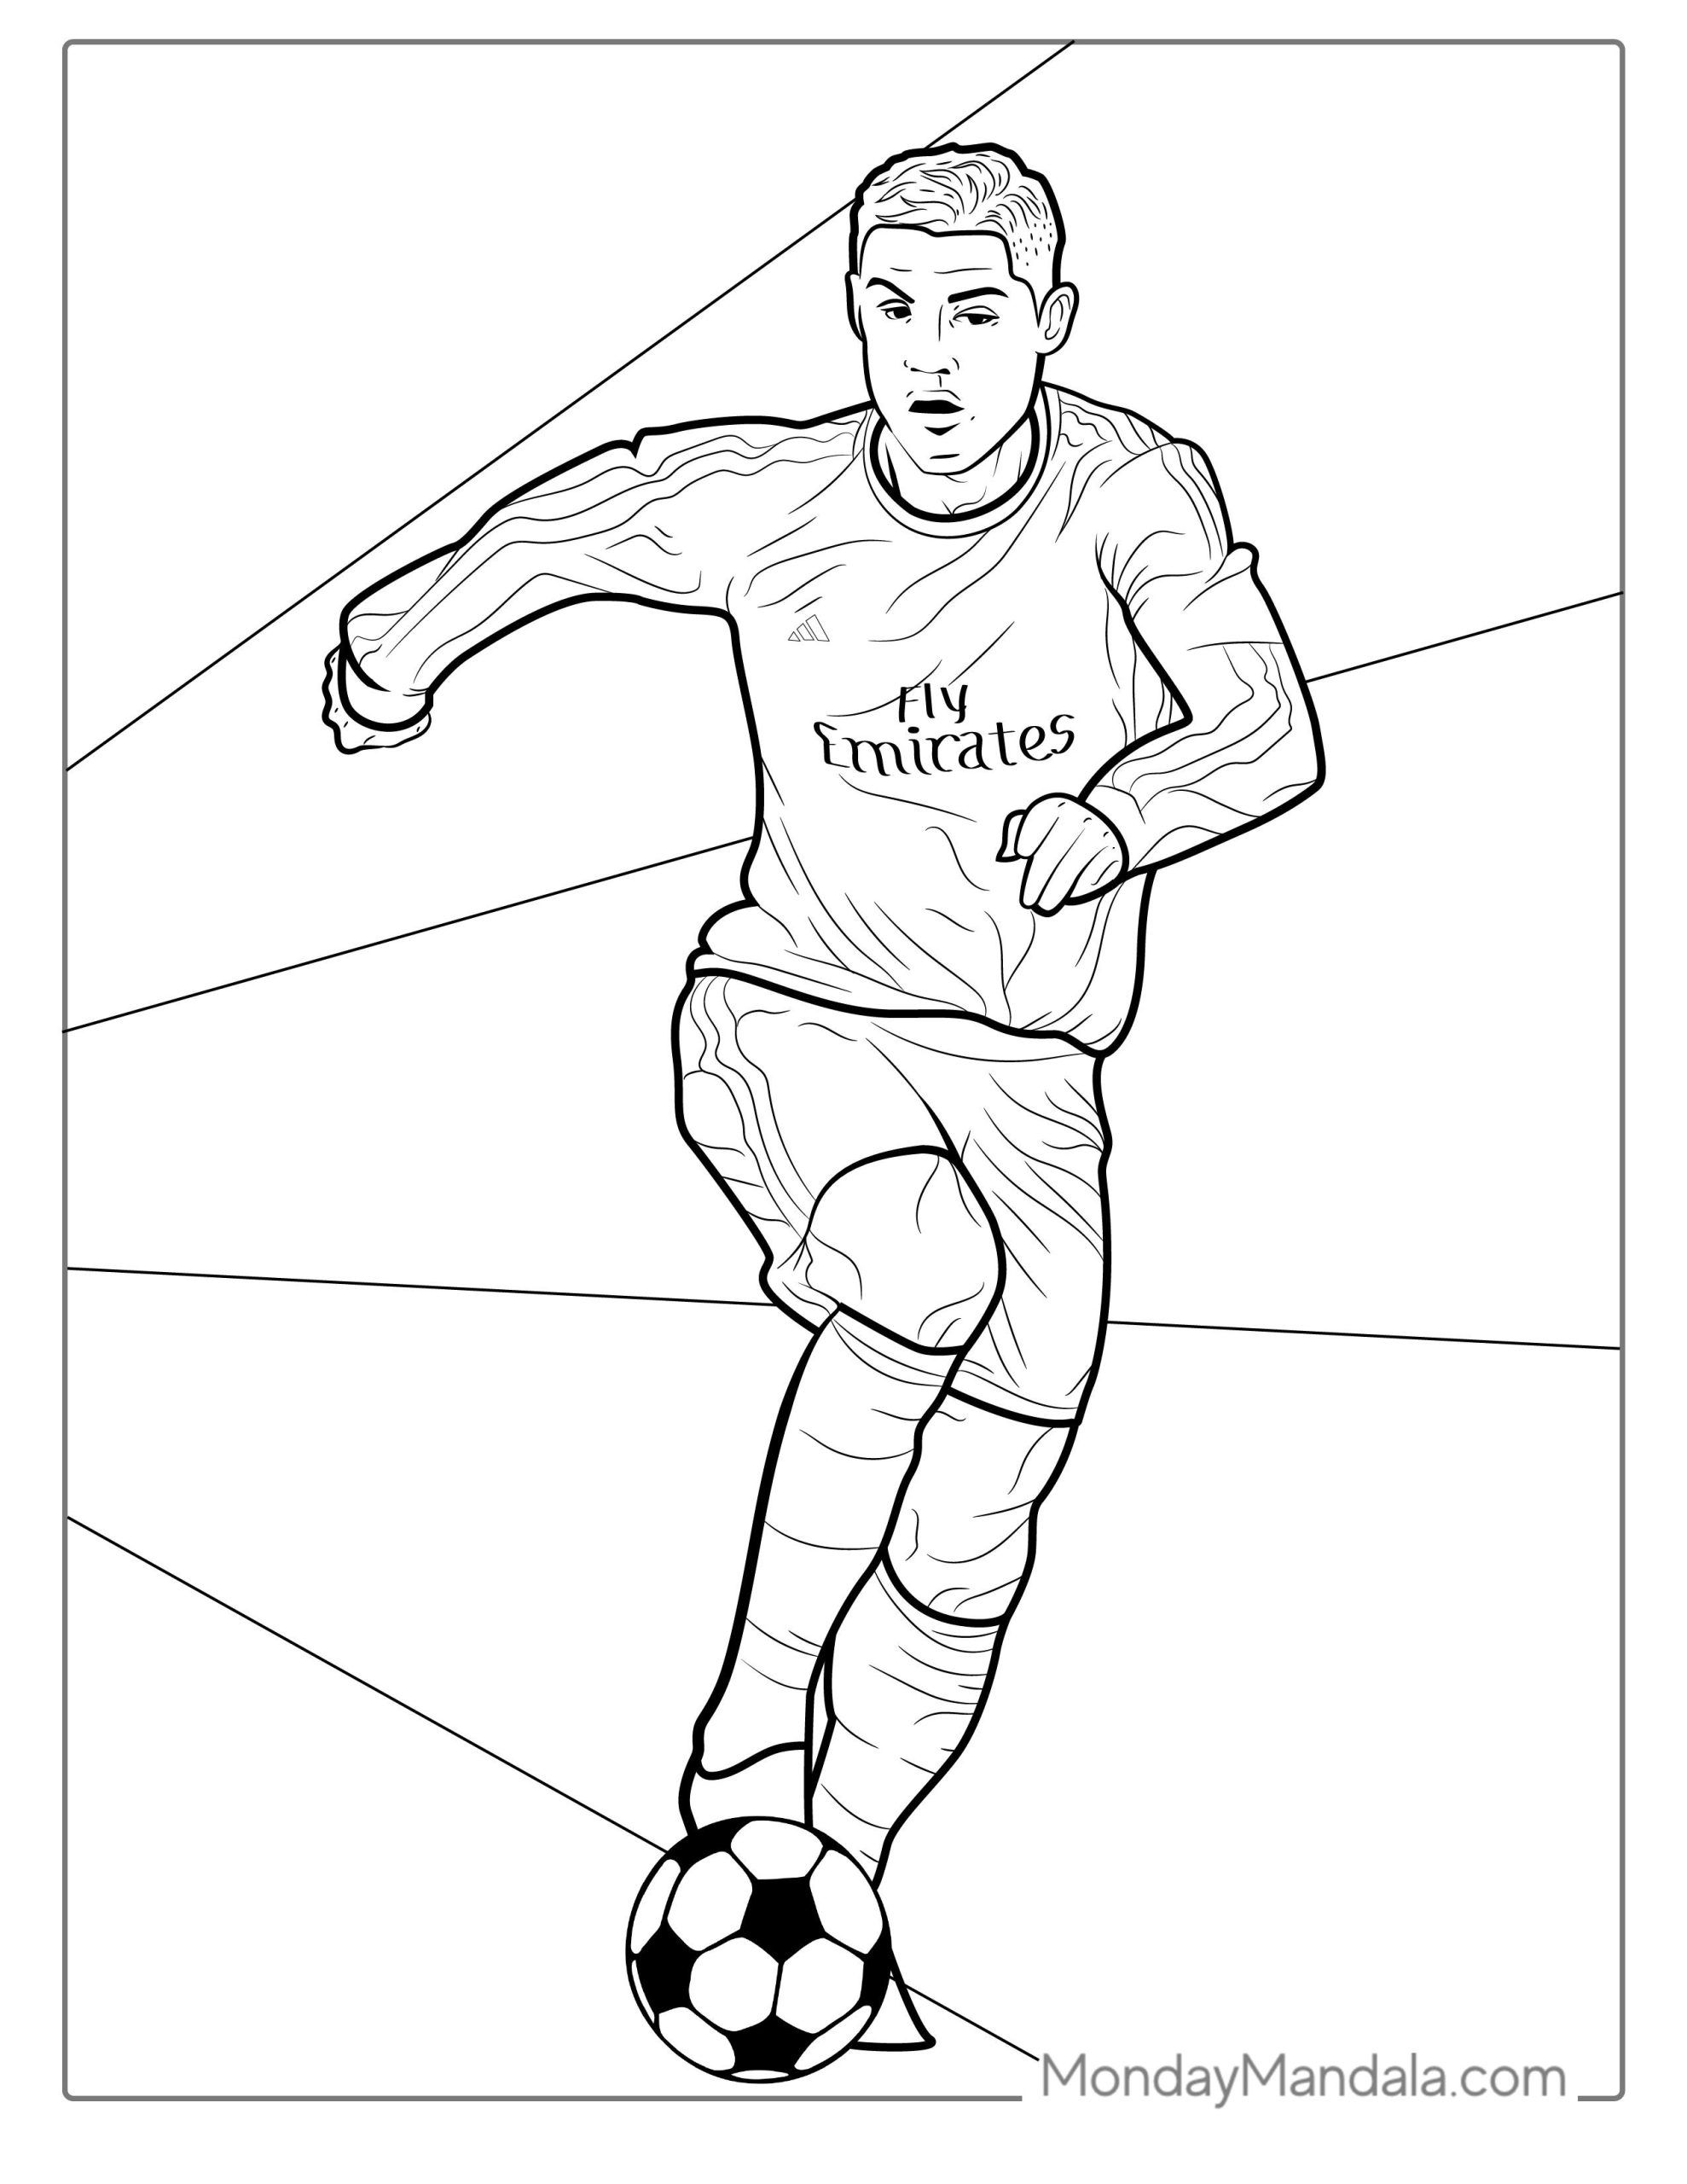 Ronaldo coloring pages free pdf printables in coloring pages love coloring pages coloring pages for kids